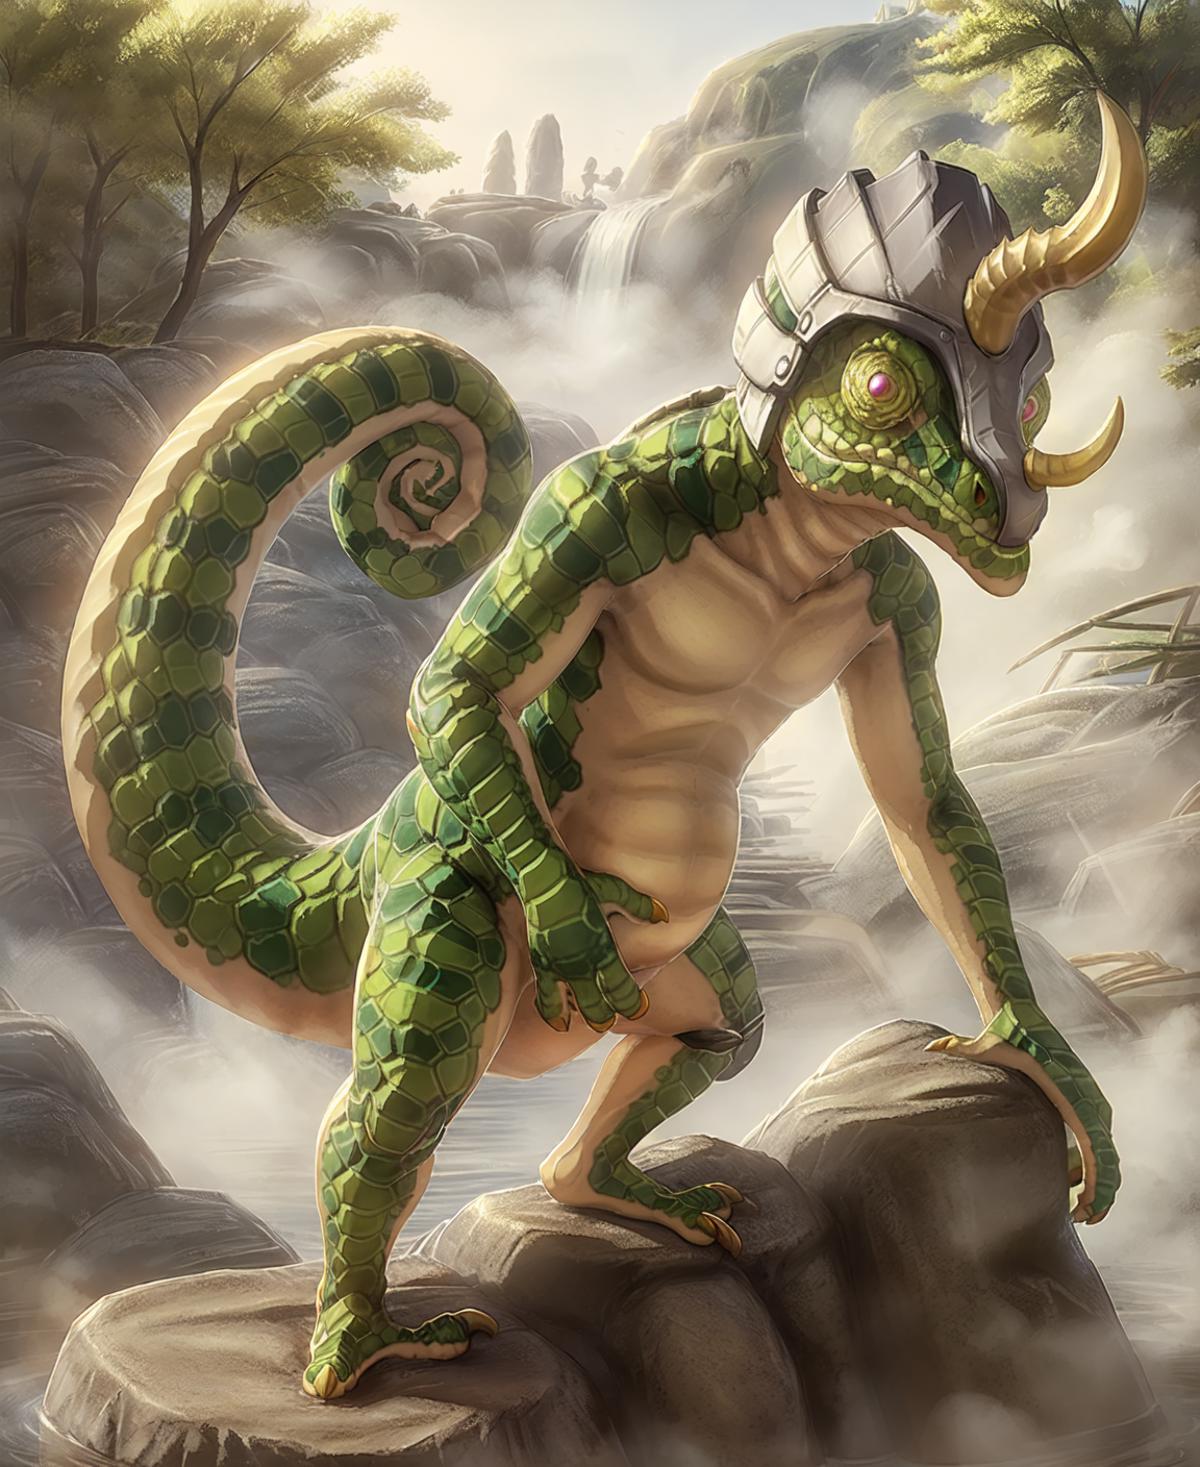 Lizalfos image by Vultsky